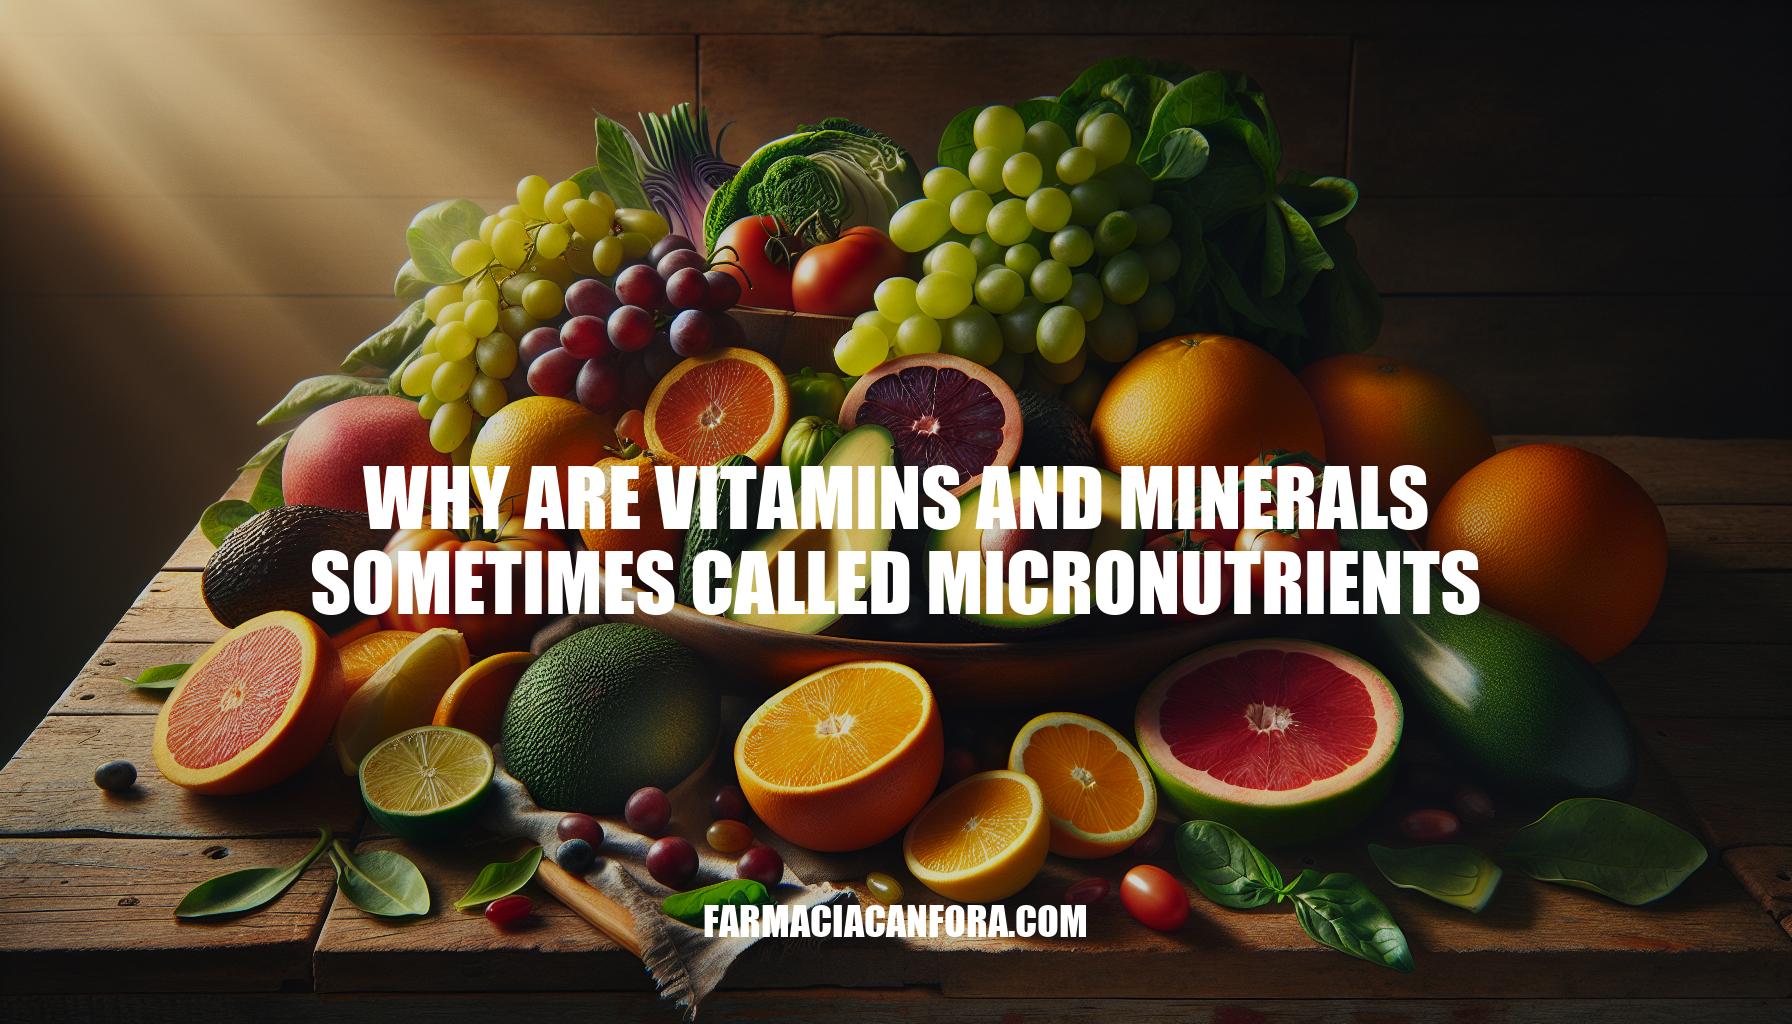 Why Are Vitamins and Minerals Sometimes Called Micronutrients